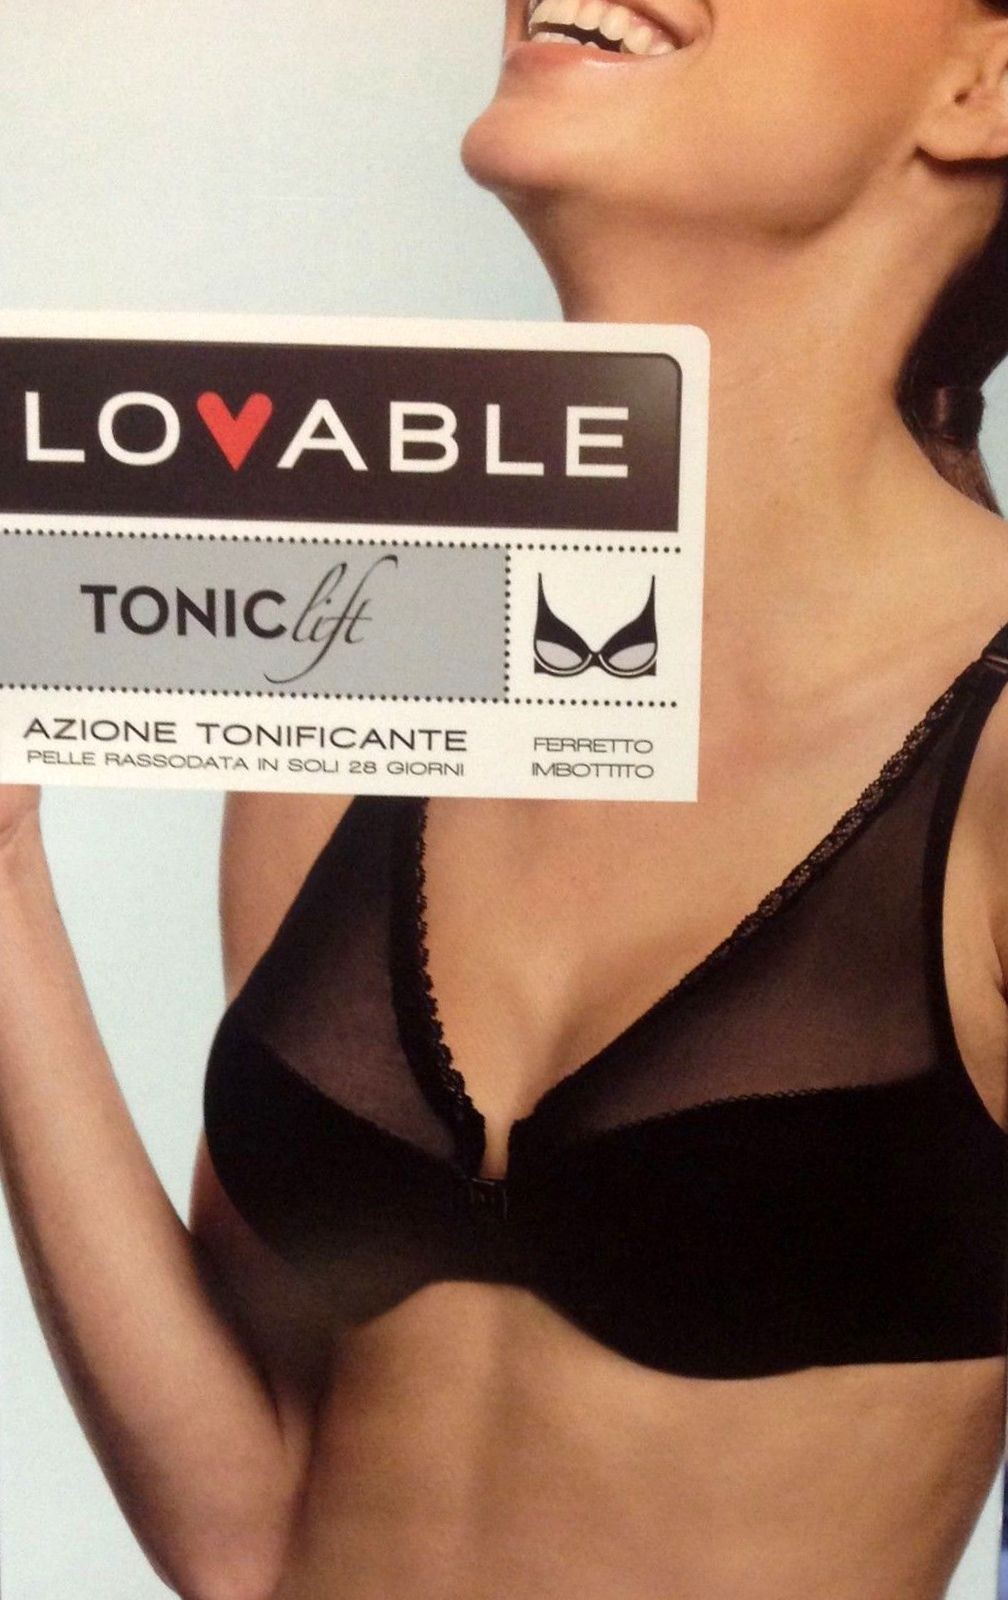 Lovable Tonic Lift No-Wire bra with underbust - Paola Fiorini